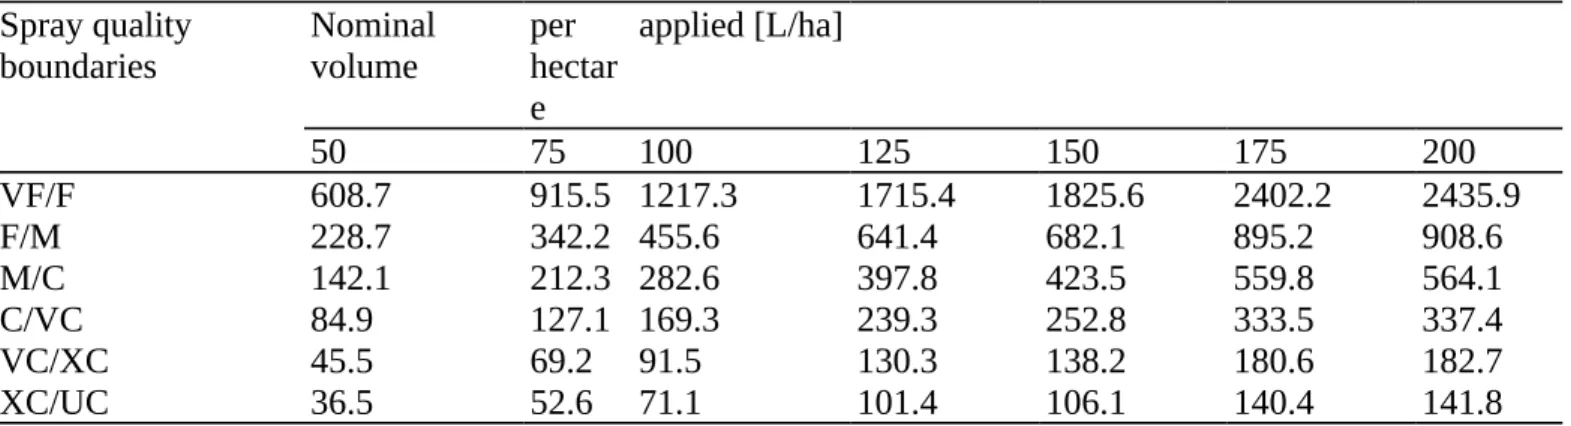 Table 8: Average number of droplets per square centimeter intercepted by the plant model  depending on the applied volume for each spray quality boundary for the high adhesion  scenario